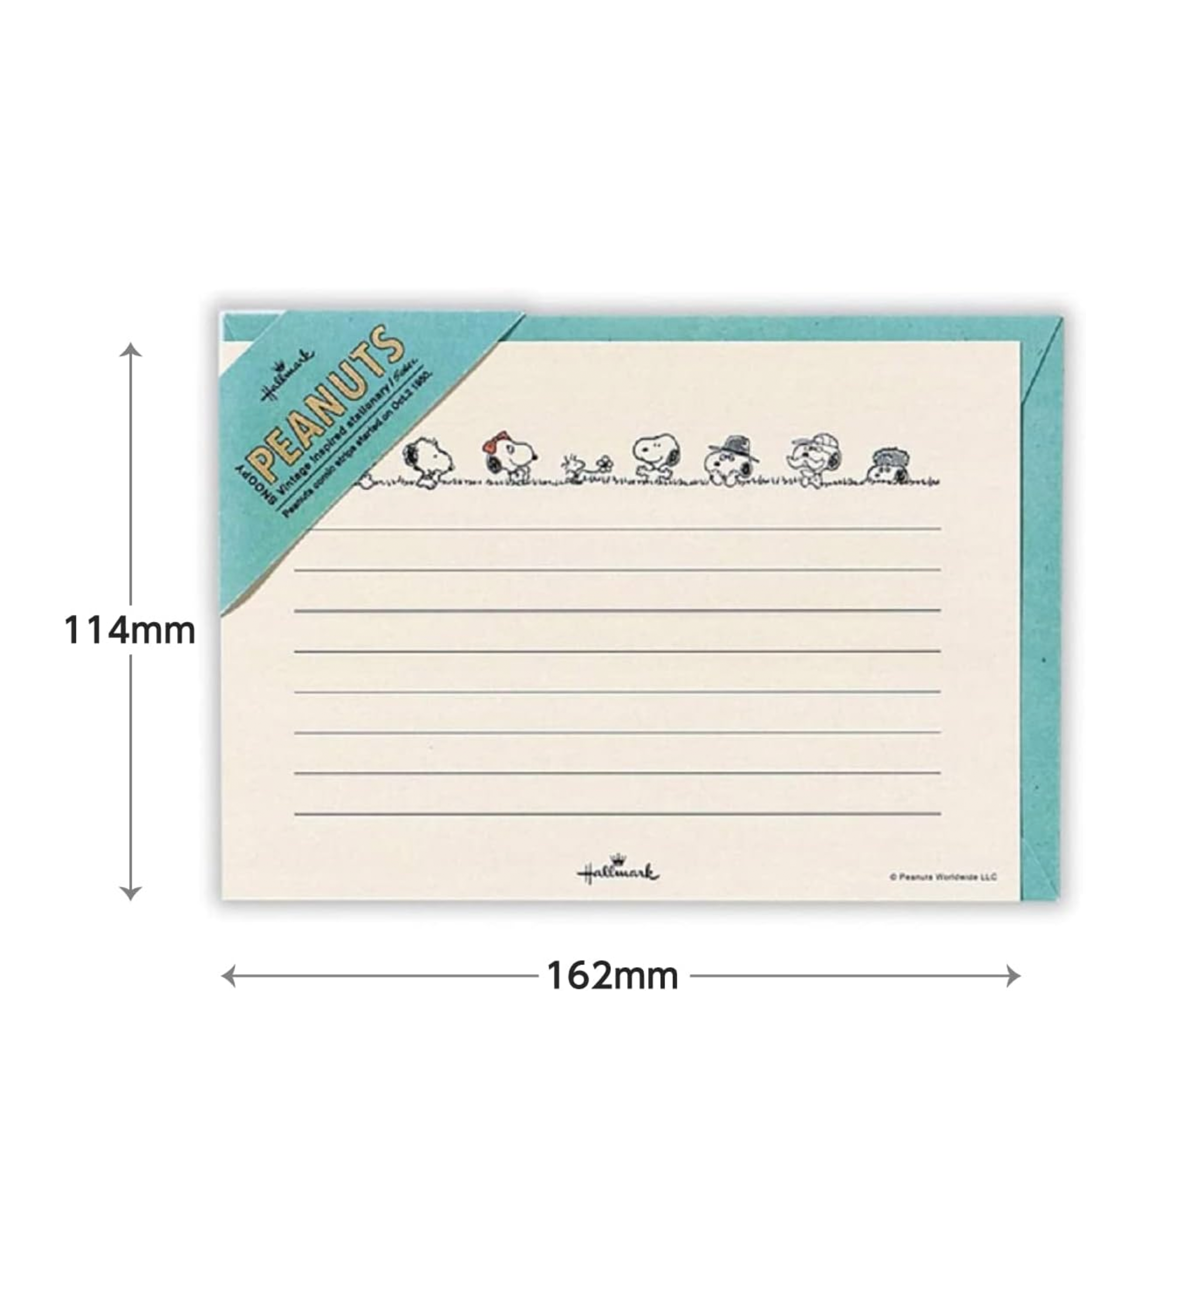 Peanuts Snoopy Letter Envelope Set [Snoopy & Brothers]